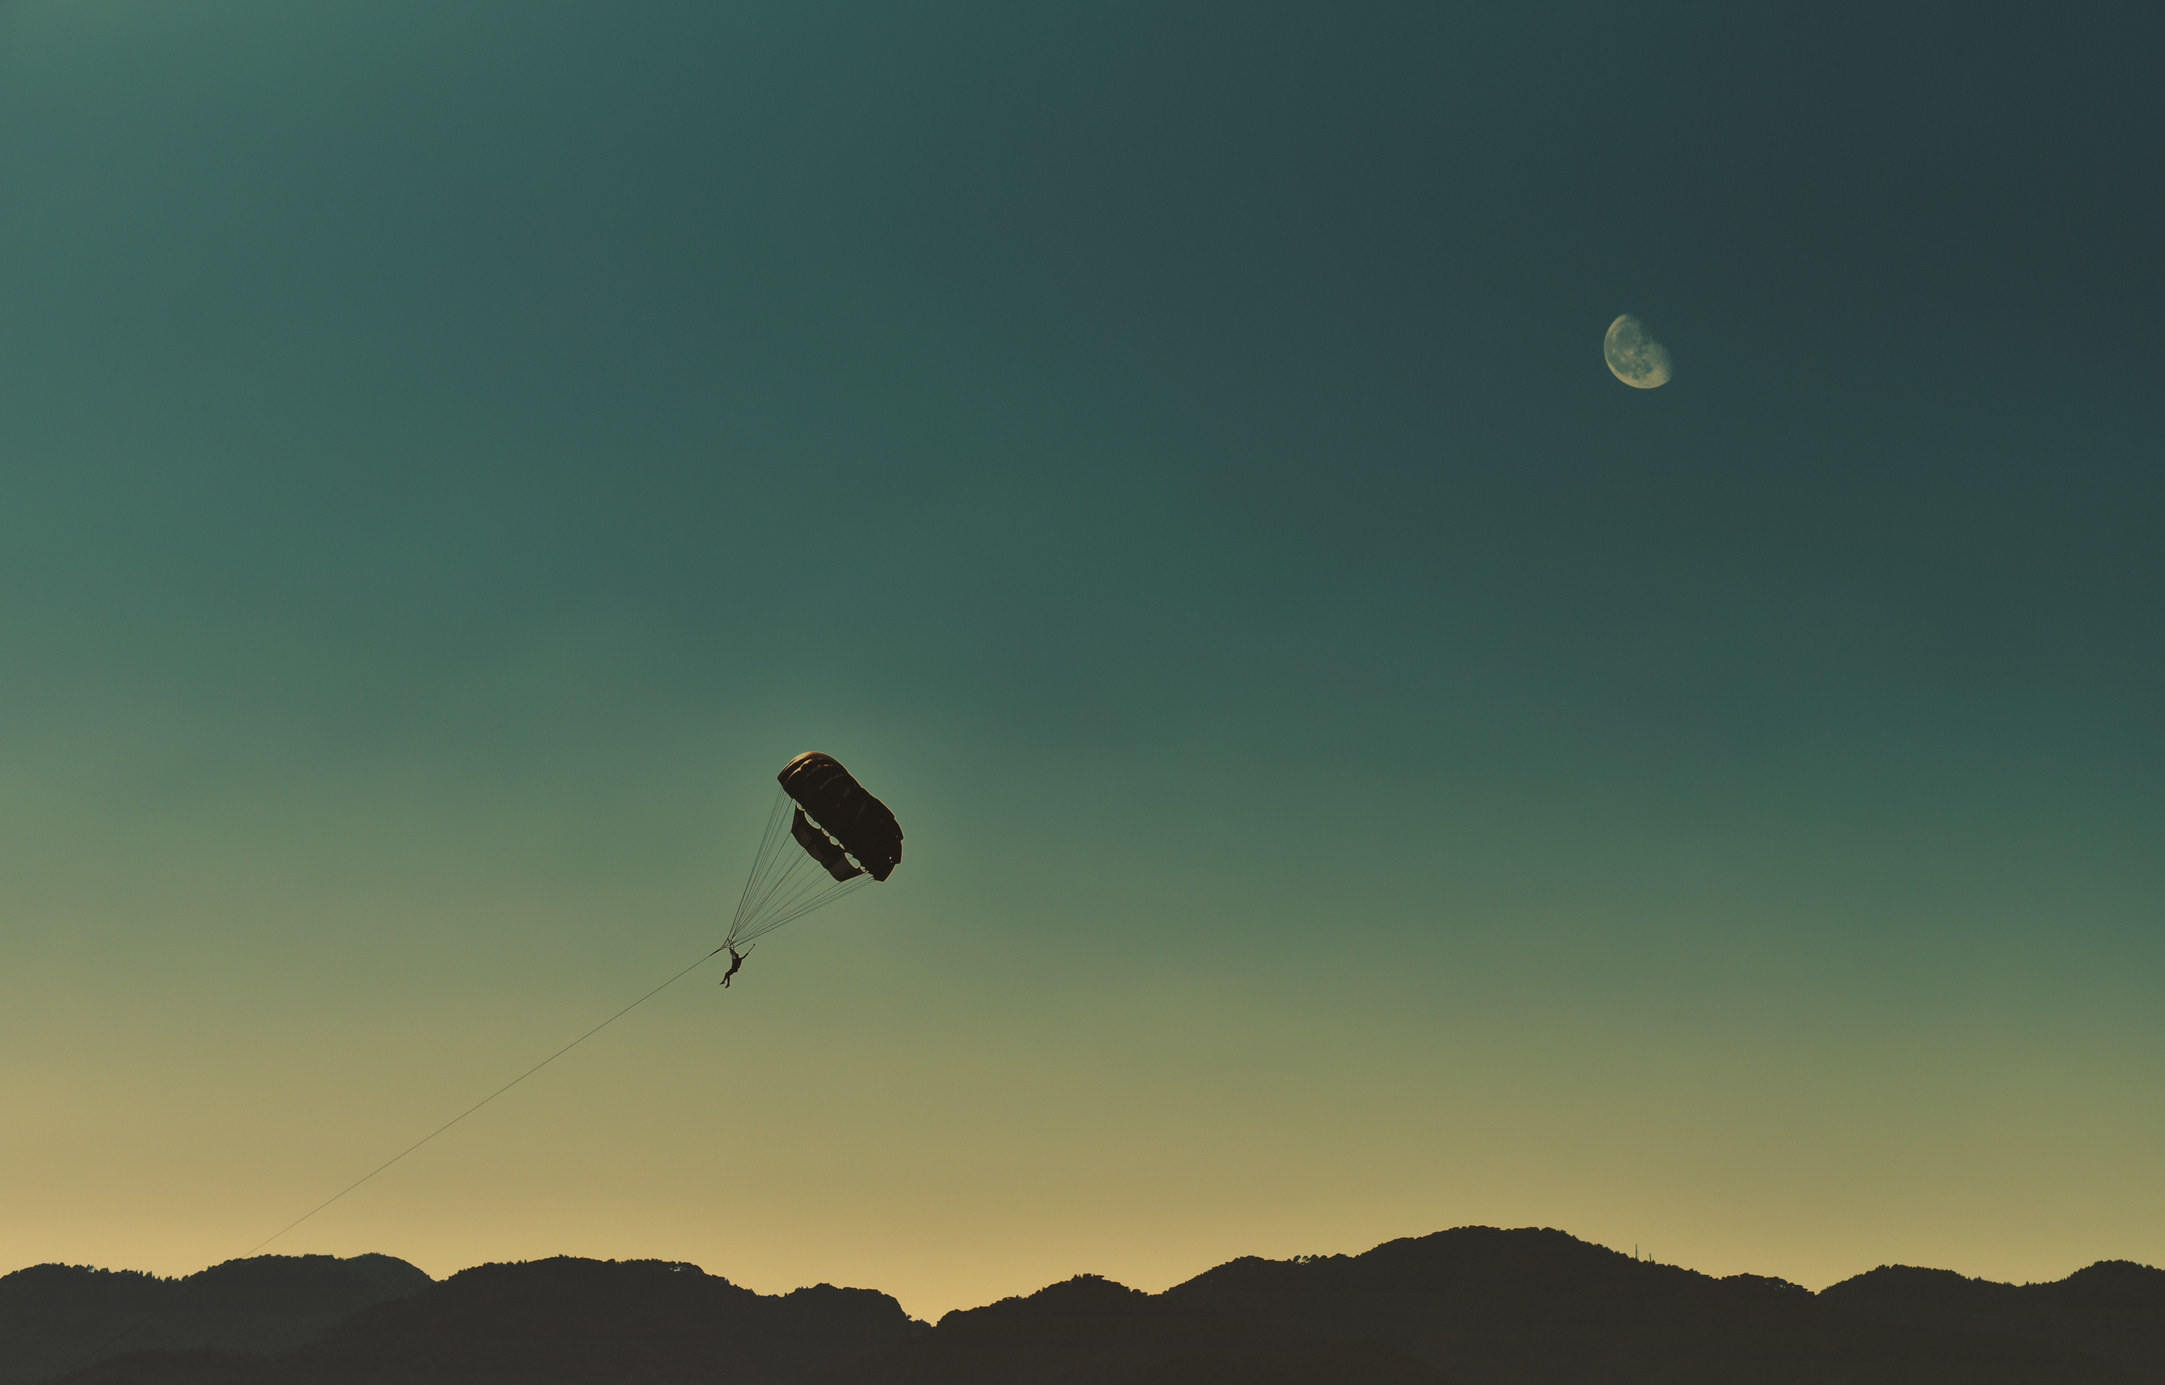 Parasailing in dusk against mountainous background and moon in the sky